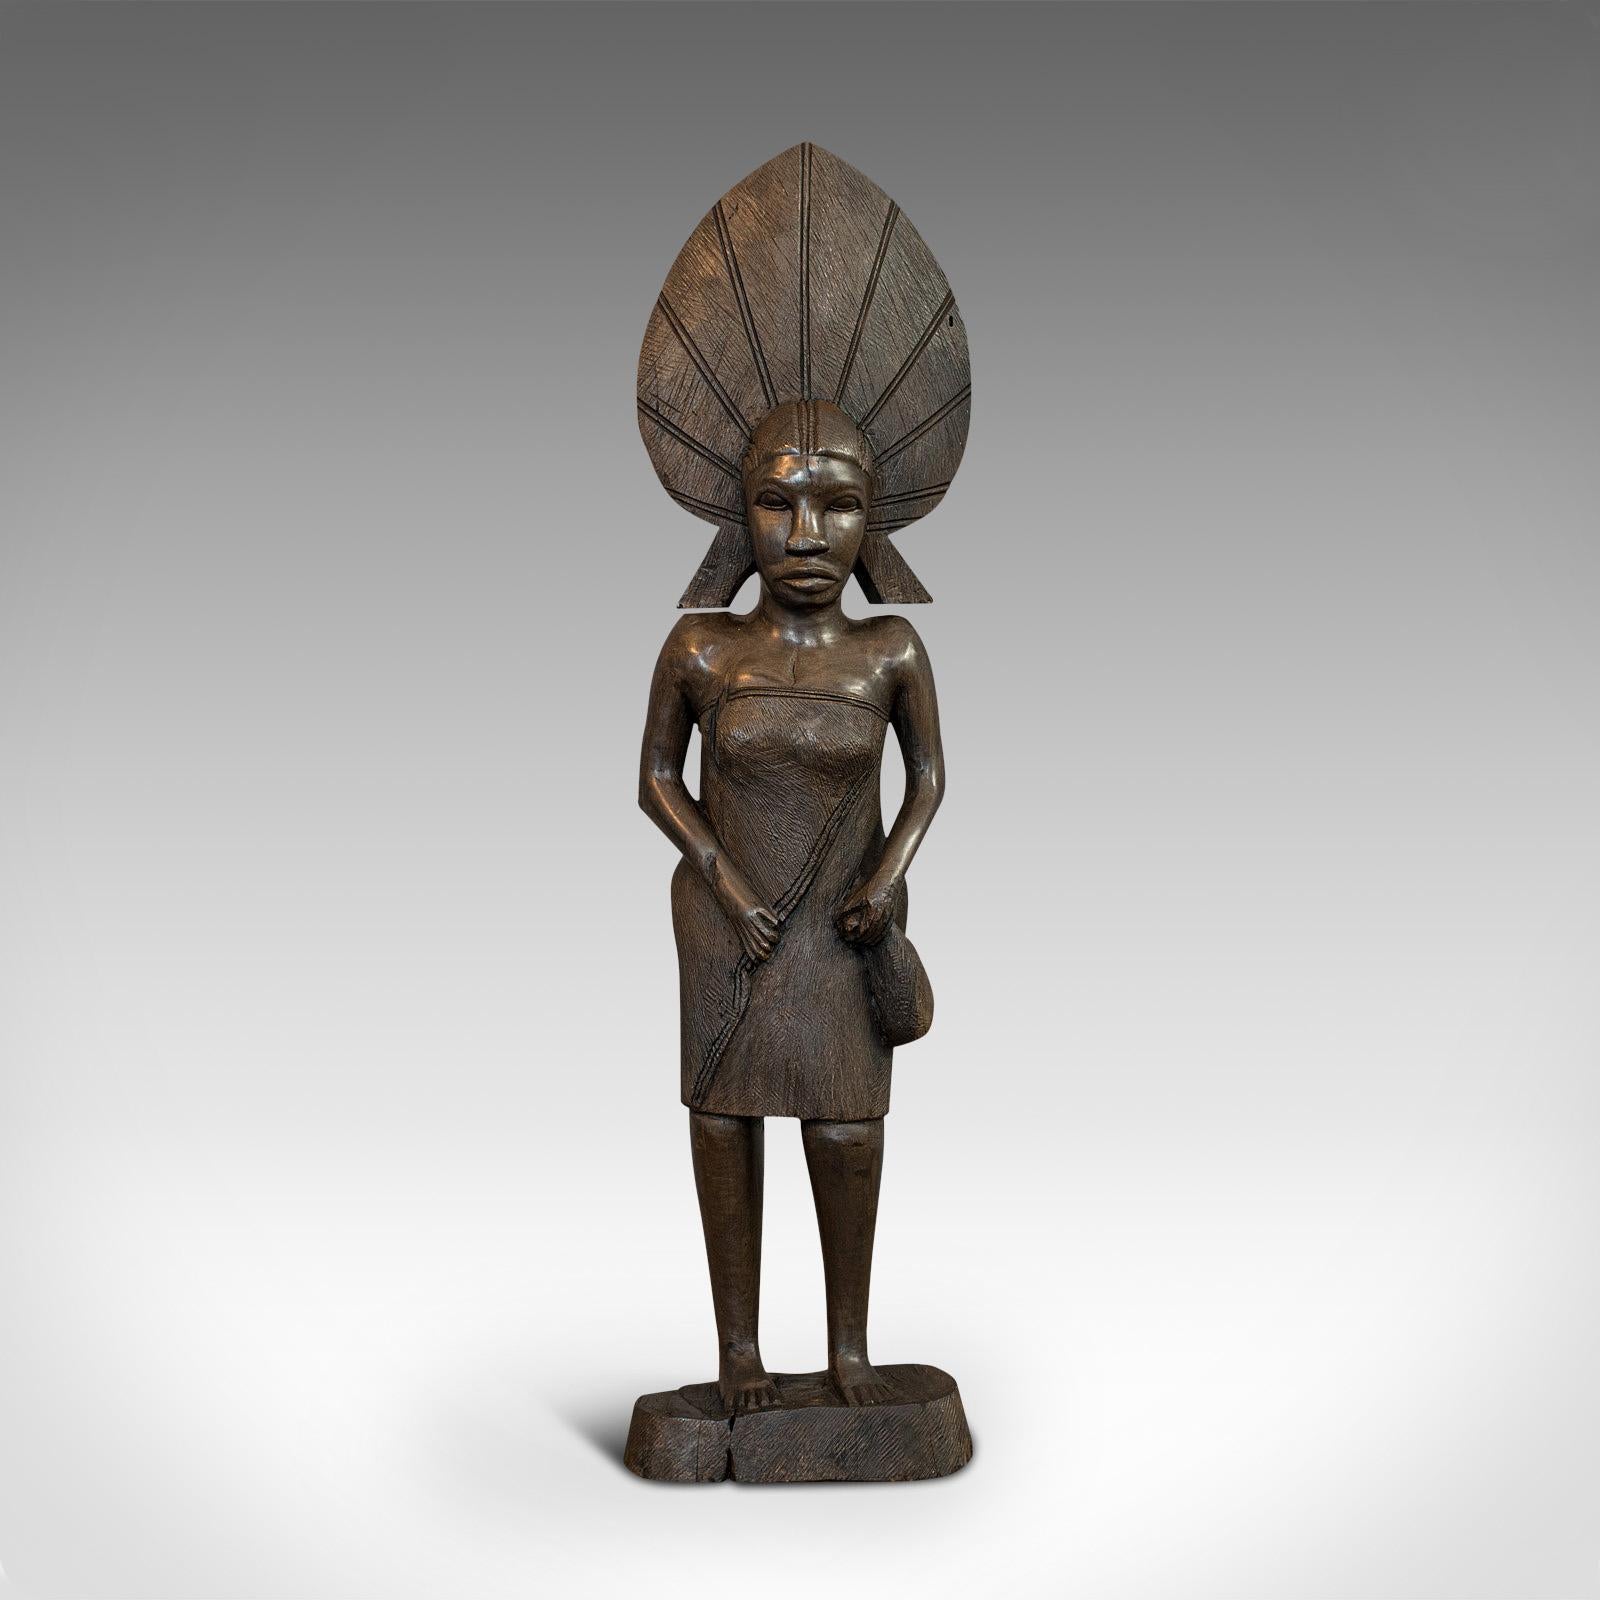 This is an antique female statue. An African, solid ebony hand carved tribal figure, dating to the late 19th century, circa 1900.

Fascinating African art from the turn of the century
Displays a desirable aged patina
Handcrafted from solid